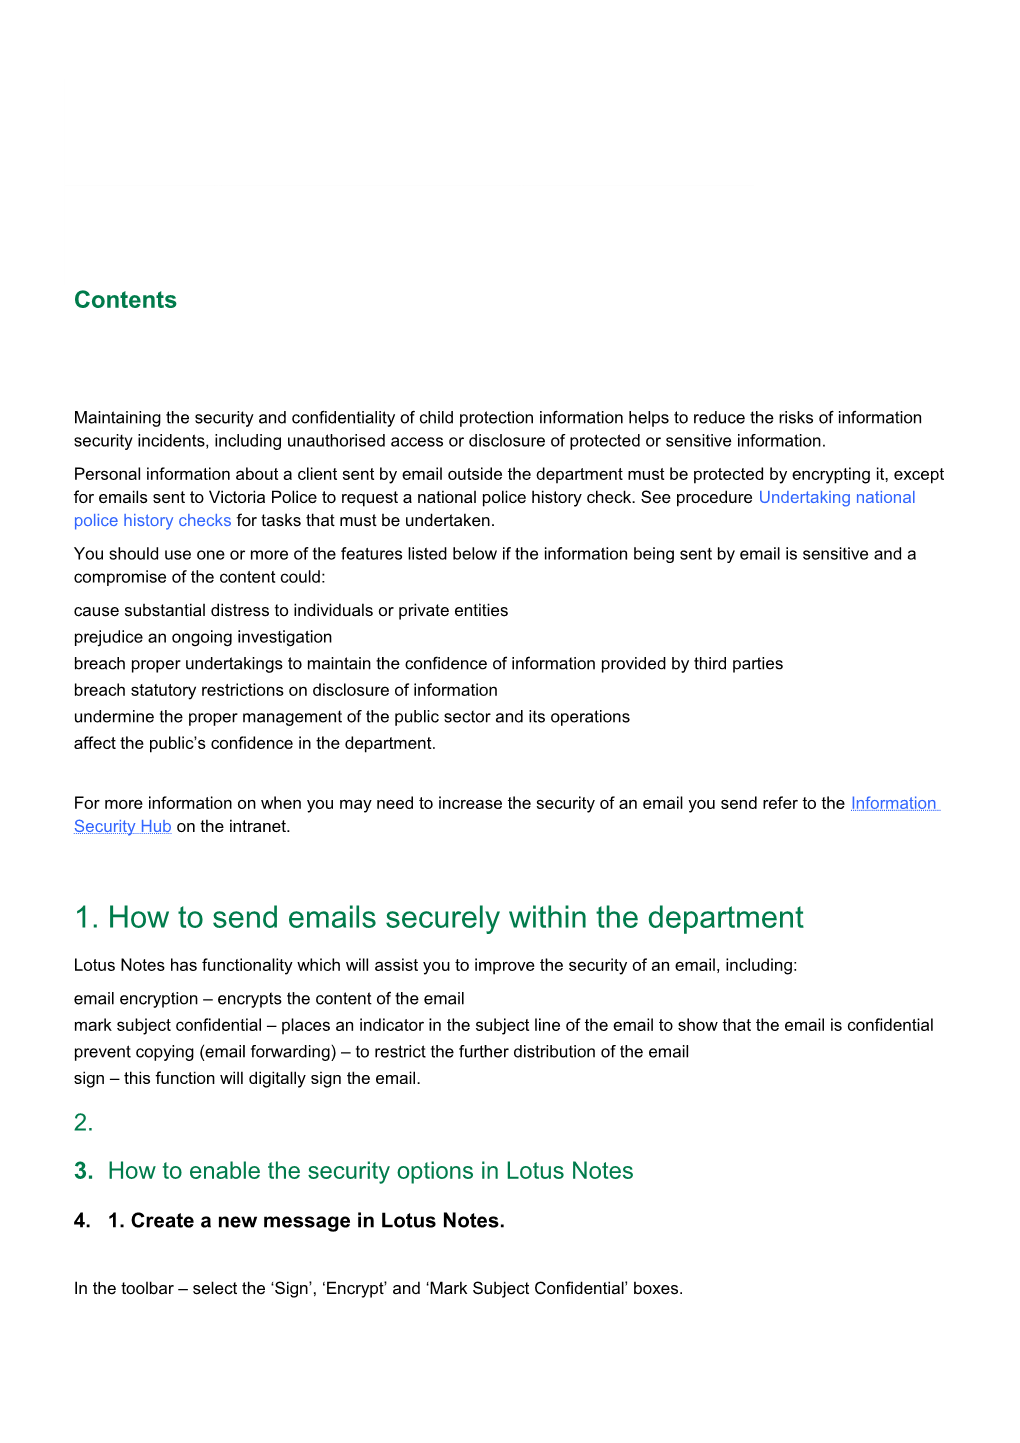 How to Send Emails Securely Within the Department